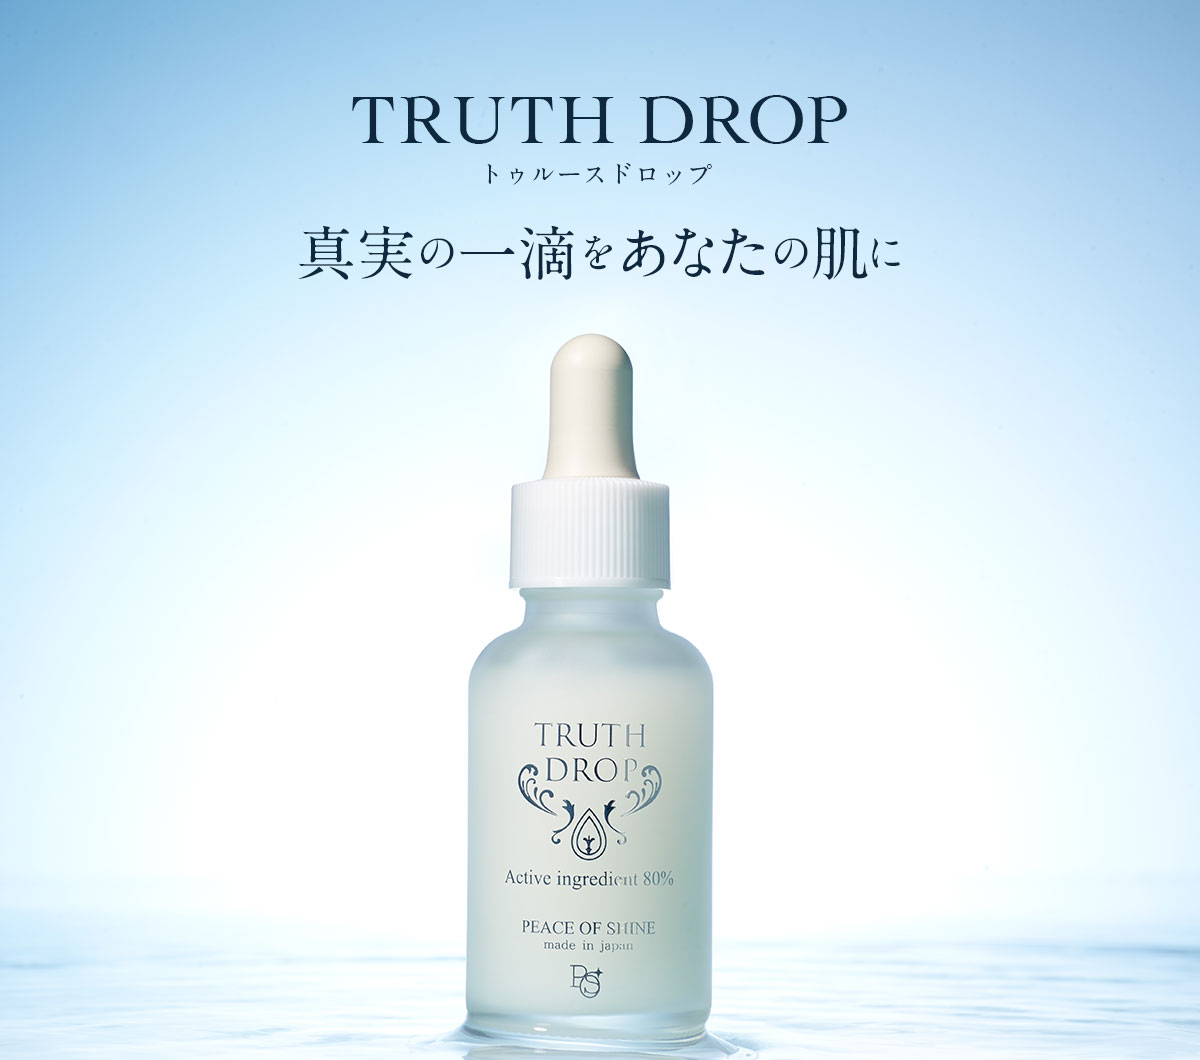 TRUTH DROP 真実の一滴をあなたの肌に